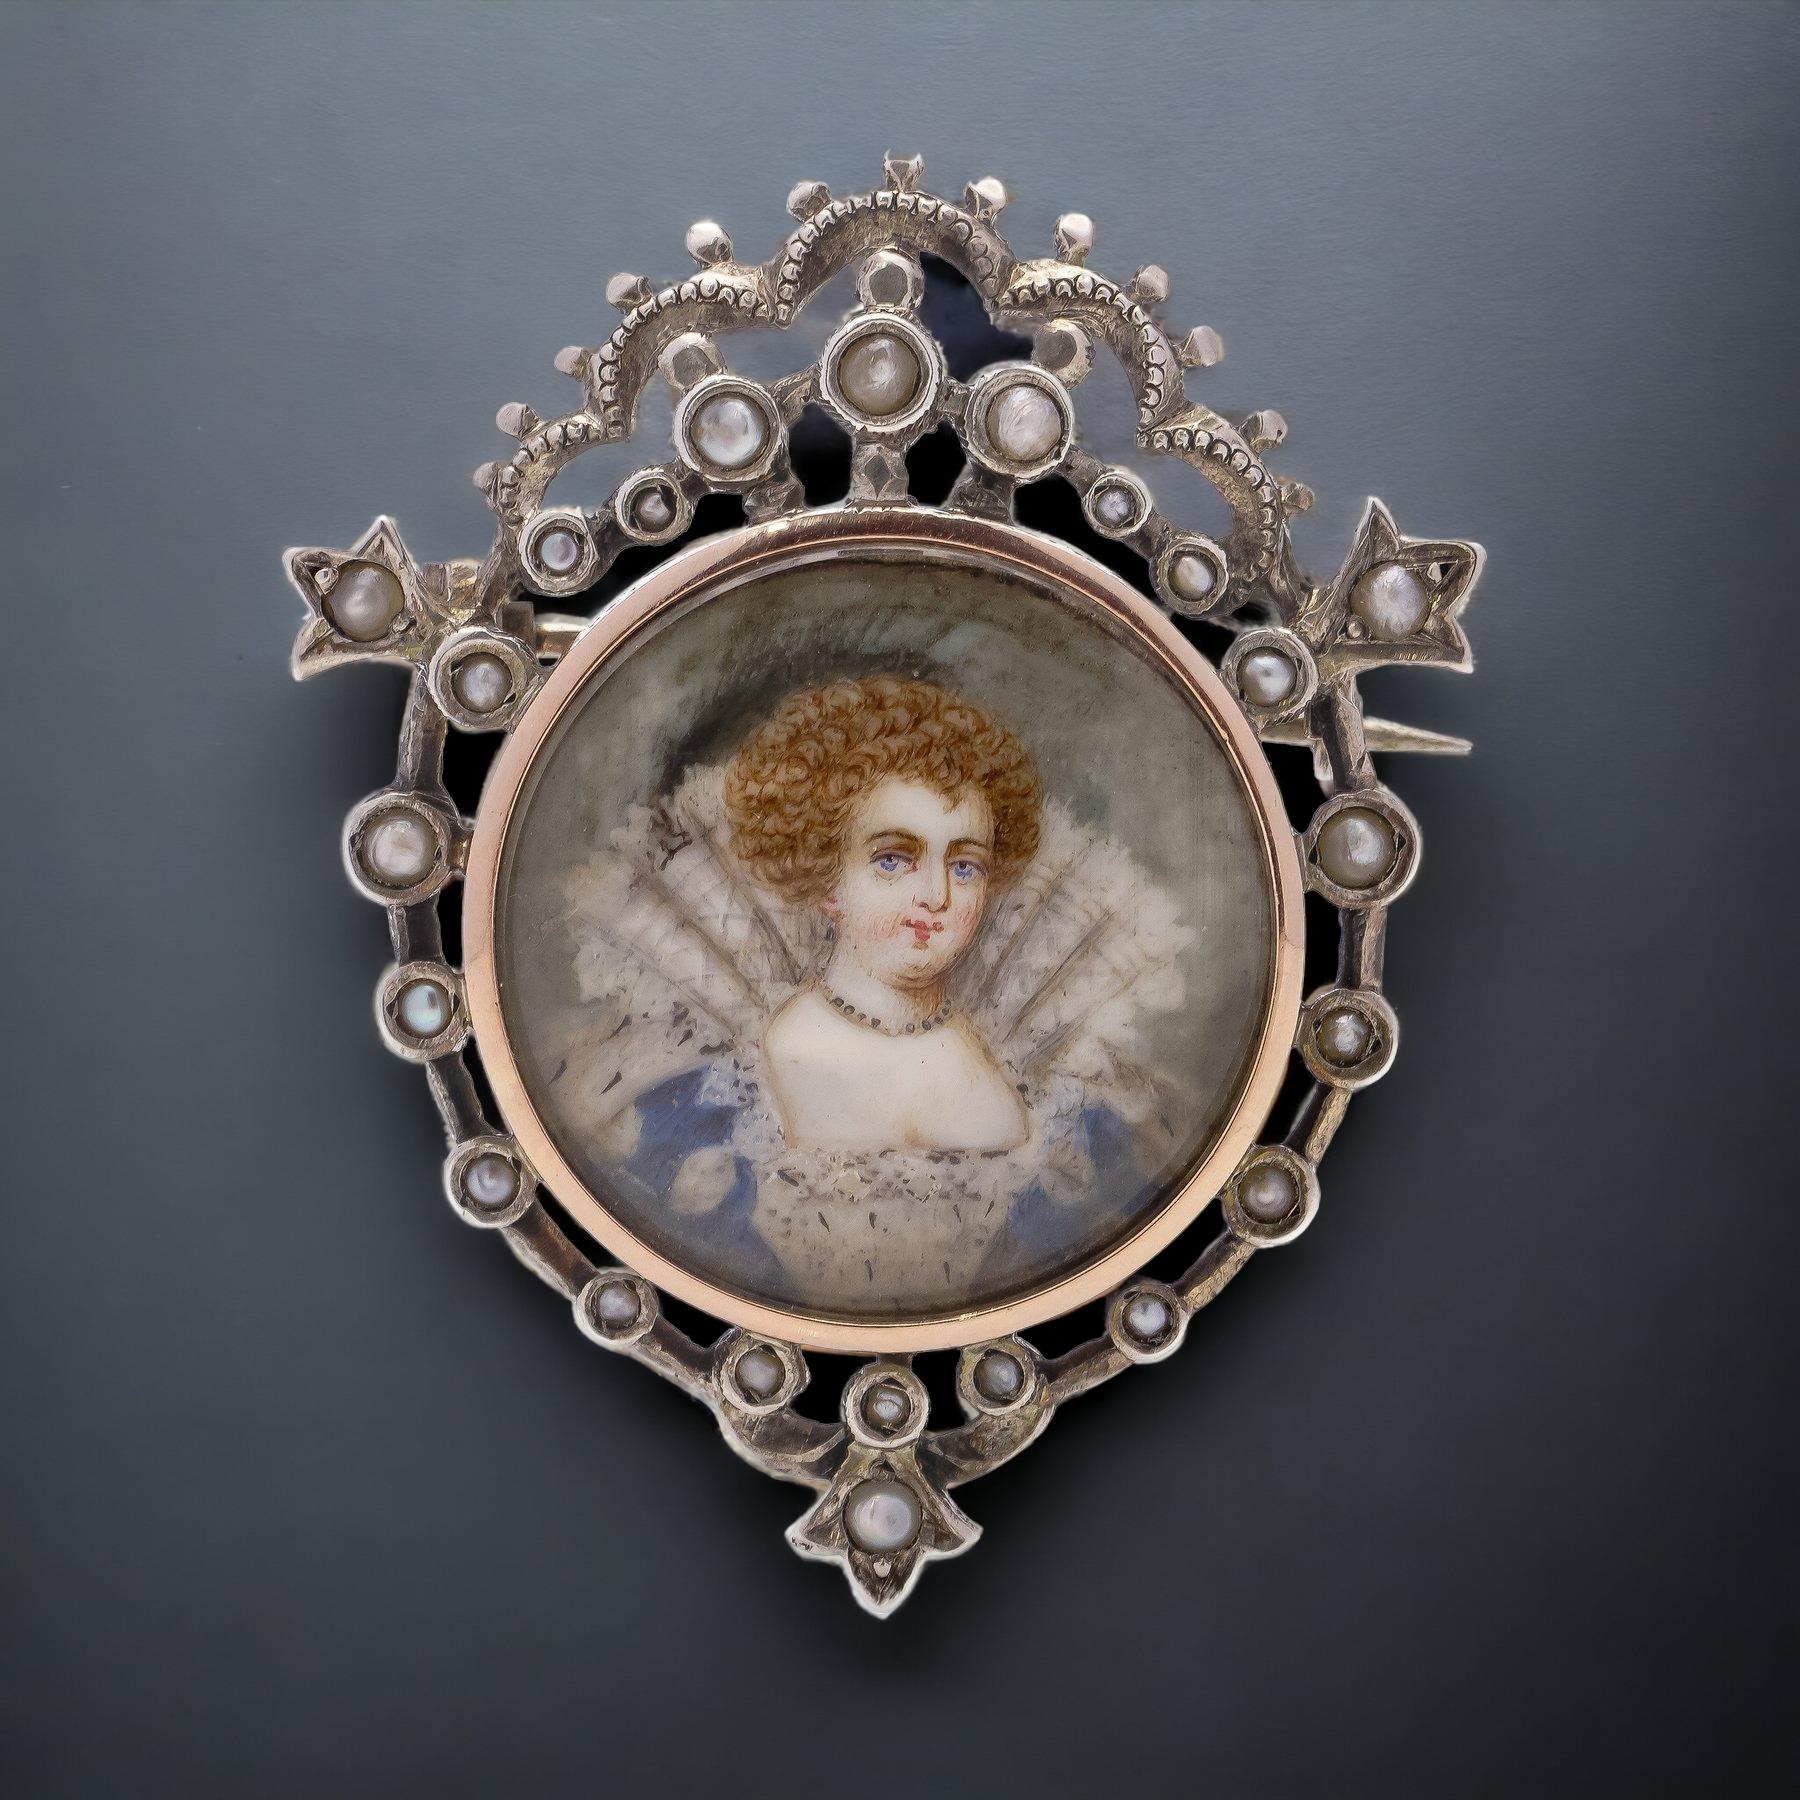 The 19th-century Victorian hand-painted watercolour miniature, exquisitely mounted in 9kt gold and silver and adorned with seed pearls, features a captivating portrayal of Anne of Denmark. This finely crafted artwork showcases Anne's regal demeanour